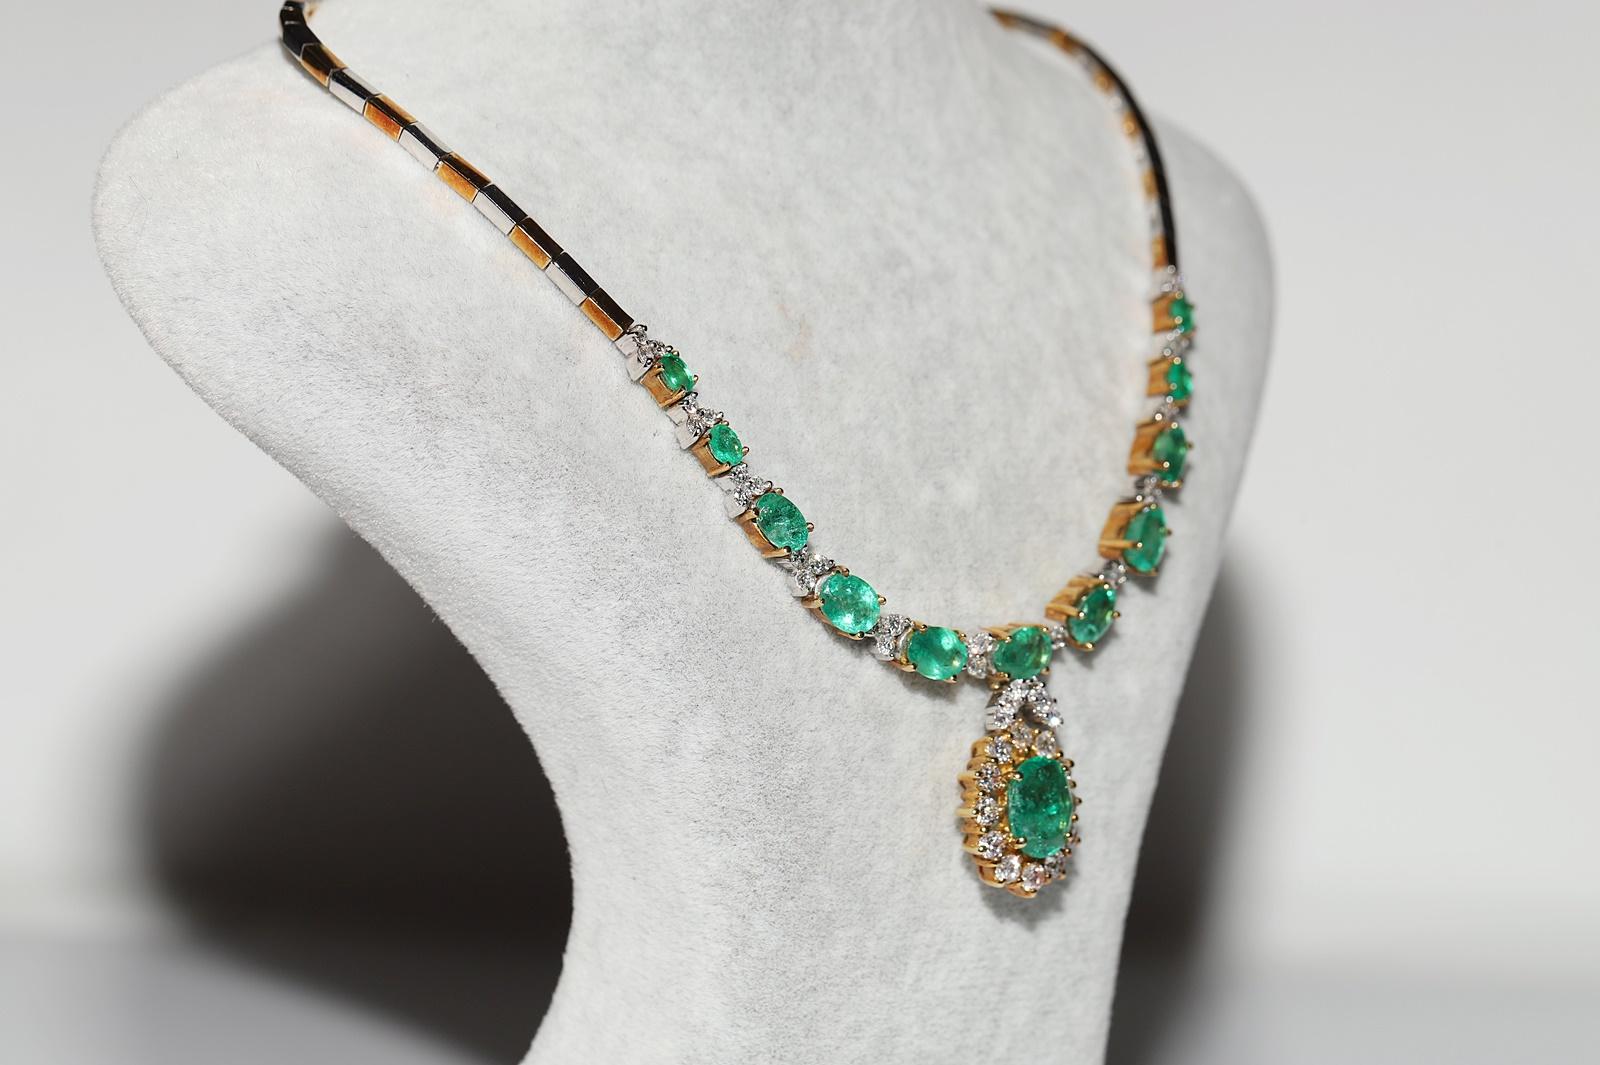 Vintage Circa 1990s 18k Gold Natural Diamond And Emerald Decorated Necklace In Good Condition For Sale In Fatih/İstanbul, 34